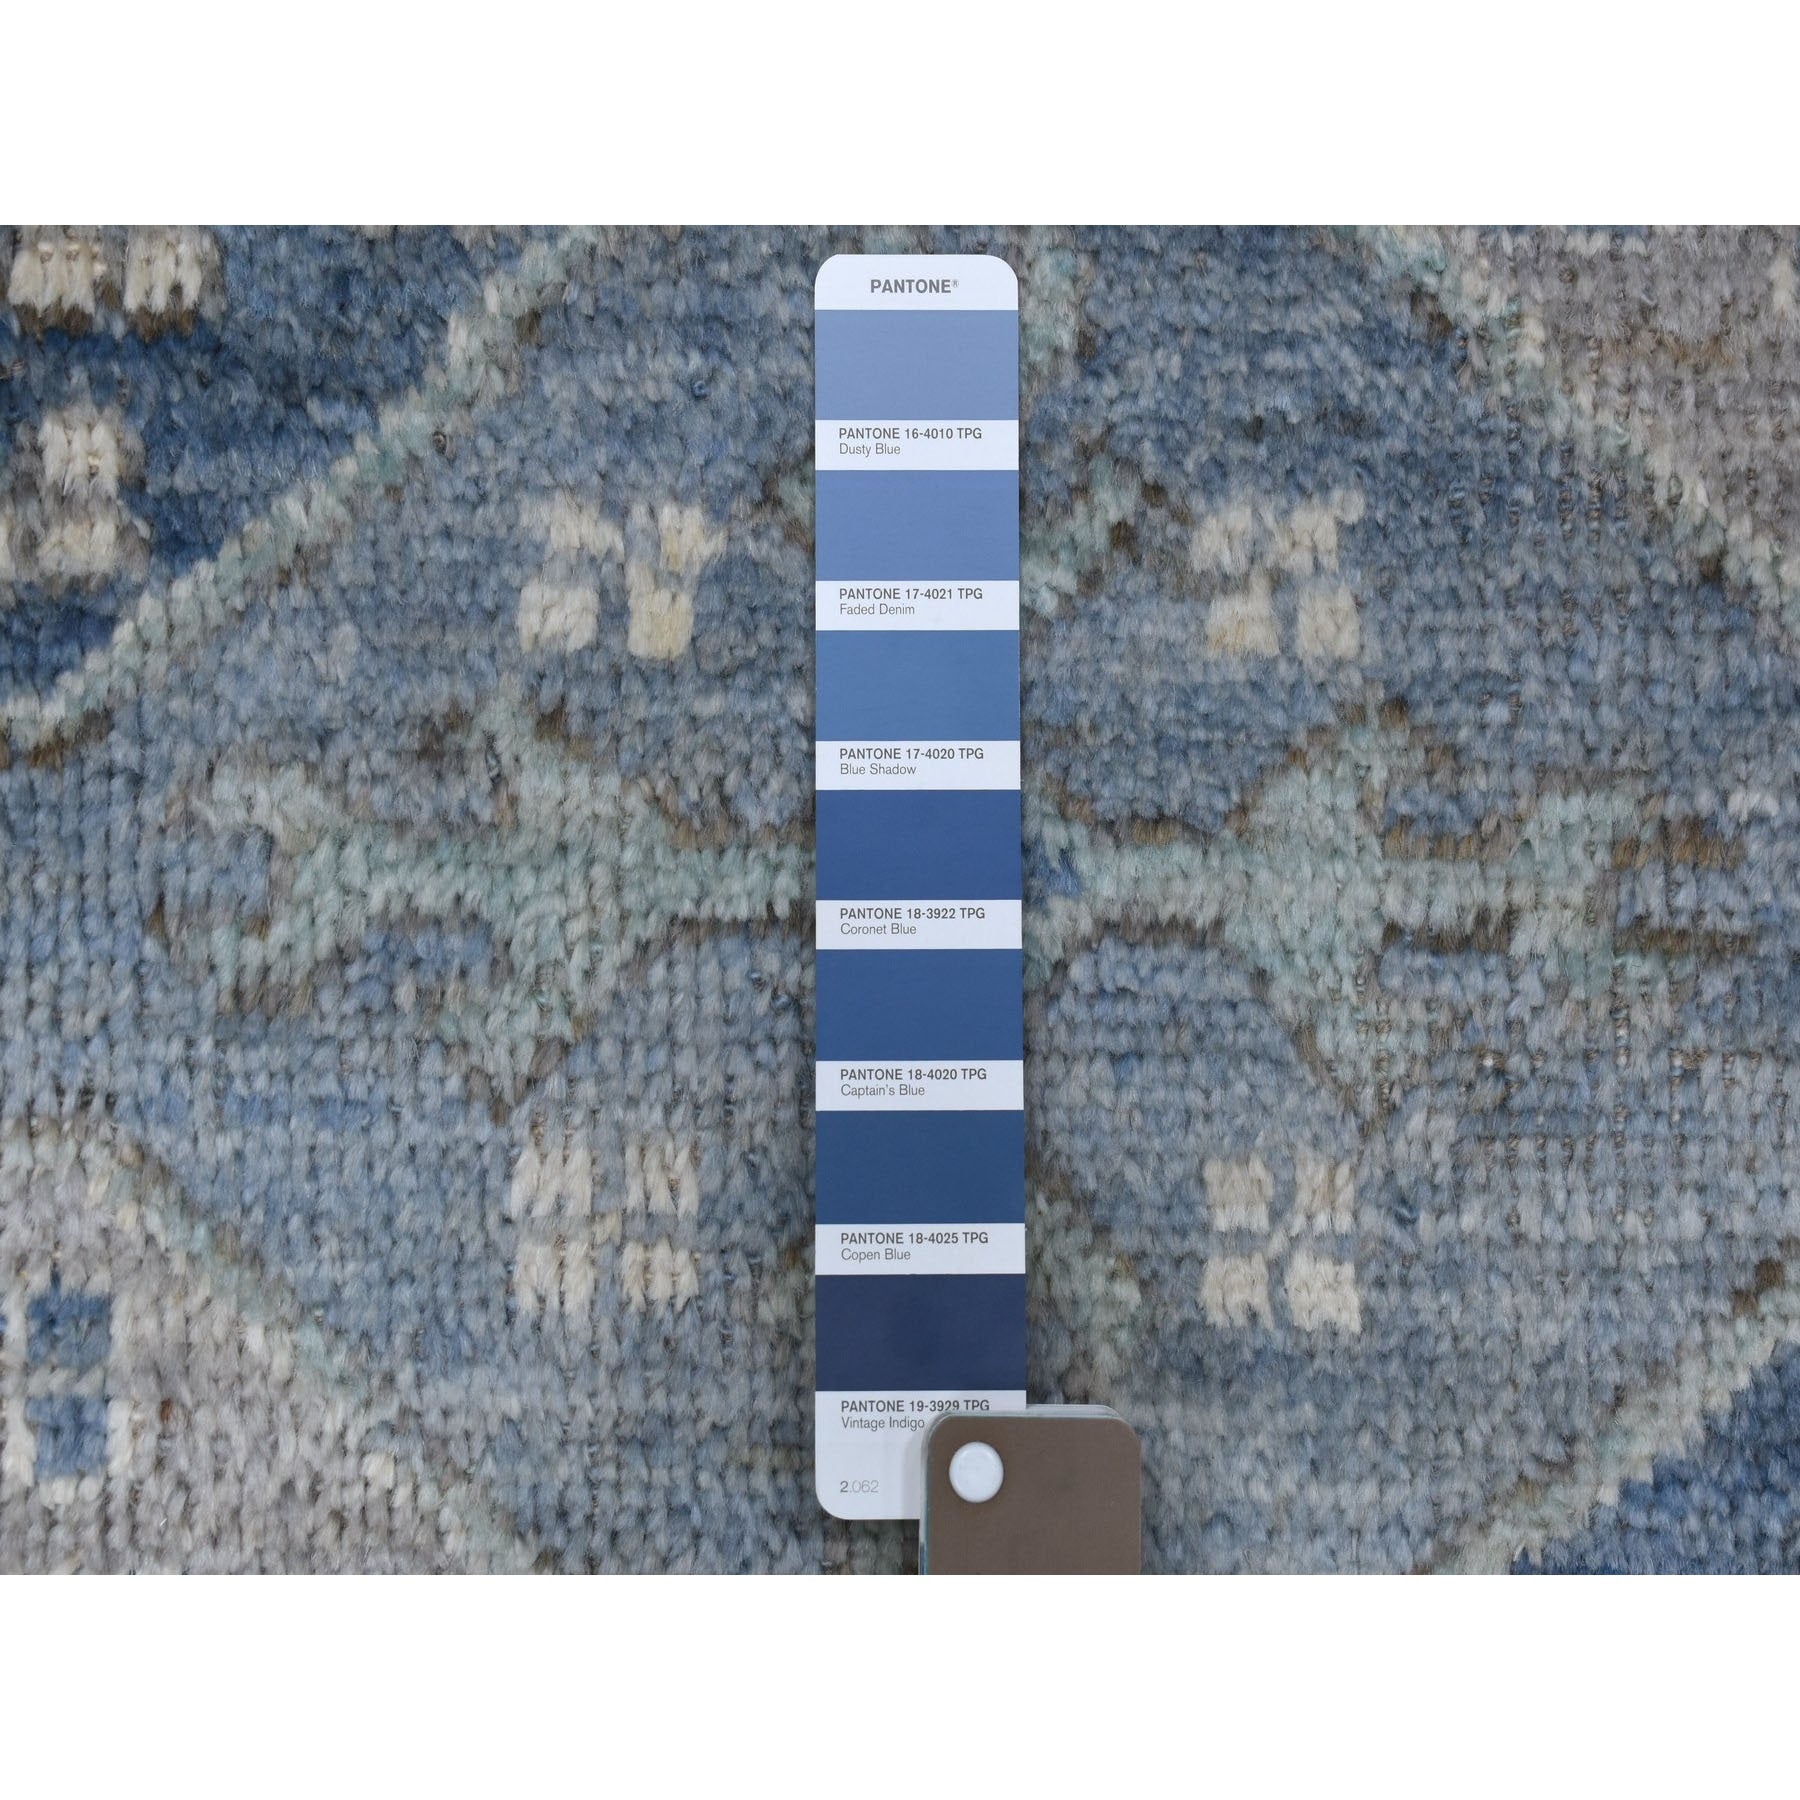 Hand Knotted Tribal Area Rug > Design# CCSR55810 > Size: 8'-0" x 9'-9"